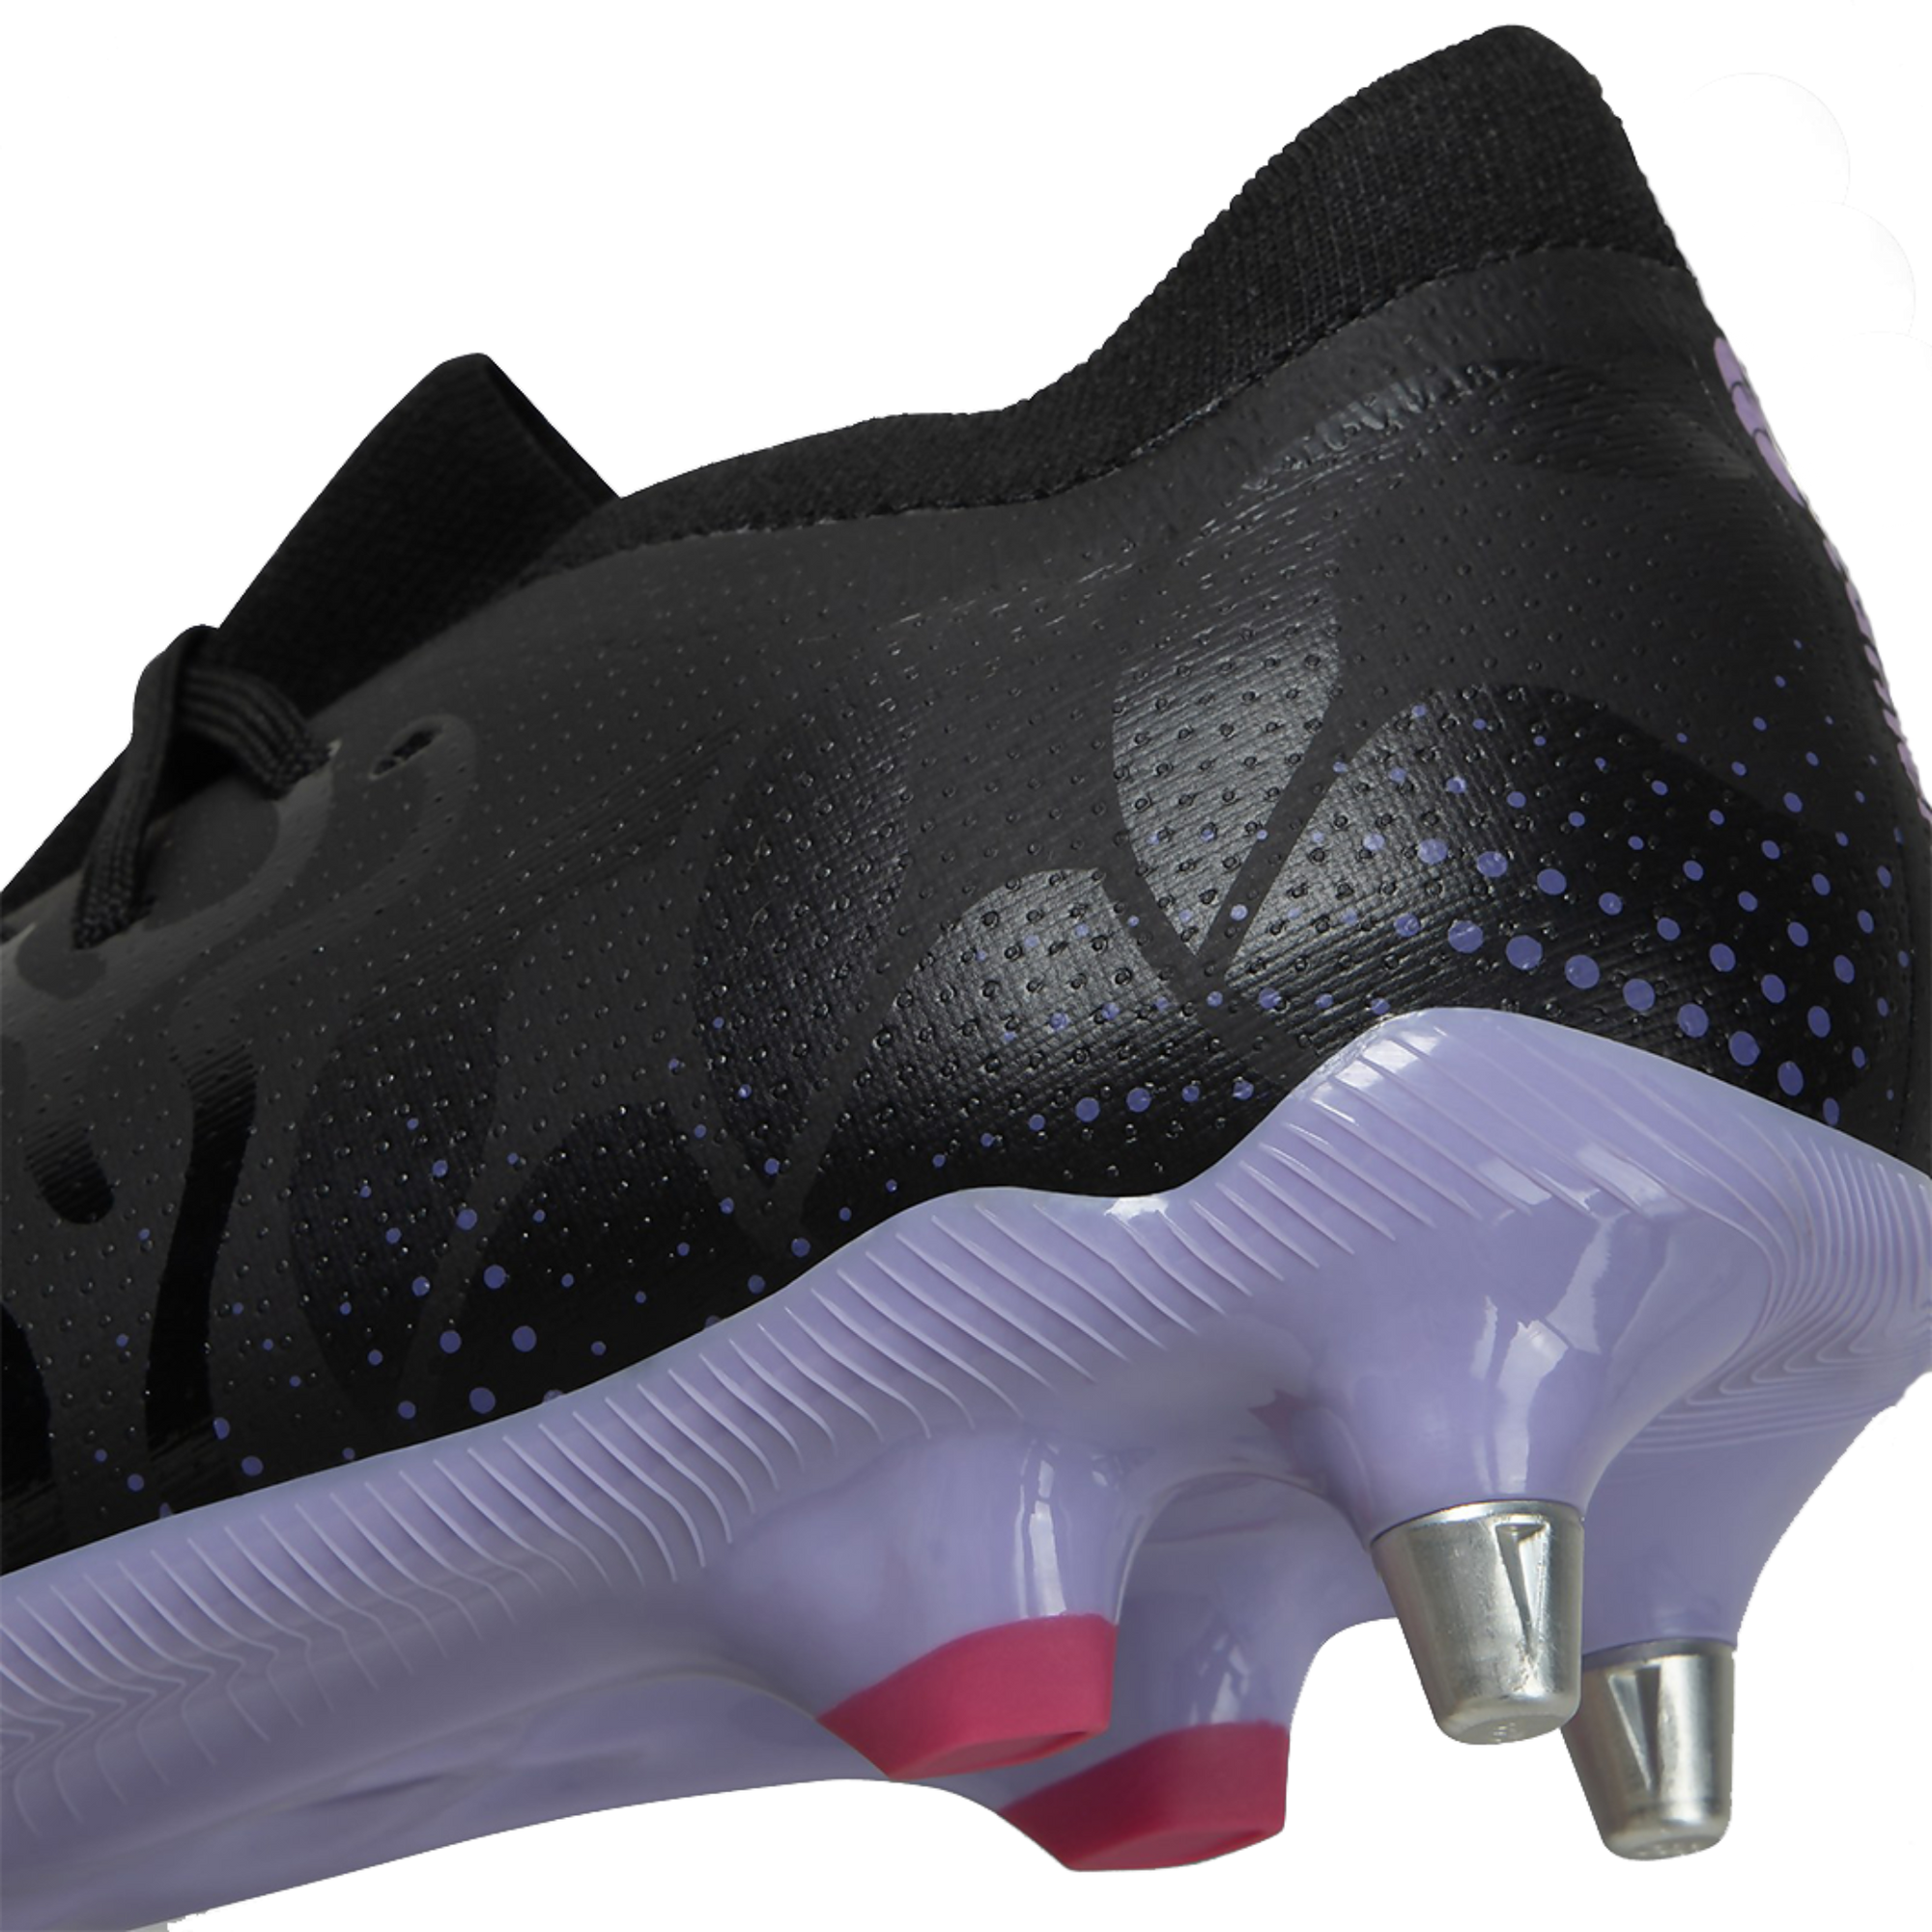 Canterbury Speed Infinite Pro SG Rugby Boots a High-Performance Durable CCC Rugby Cleat Black/Purple Available in Unisex Sizing 6-16